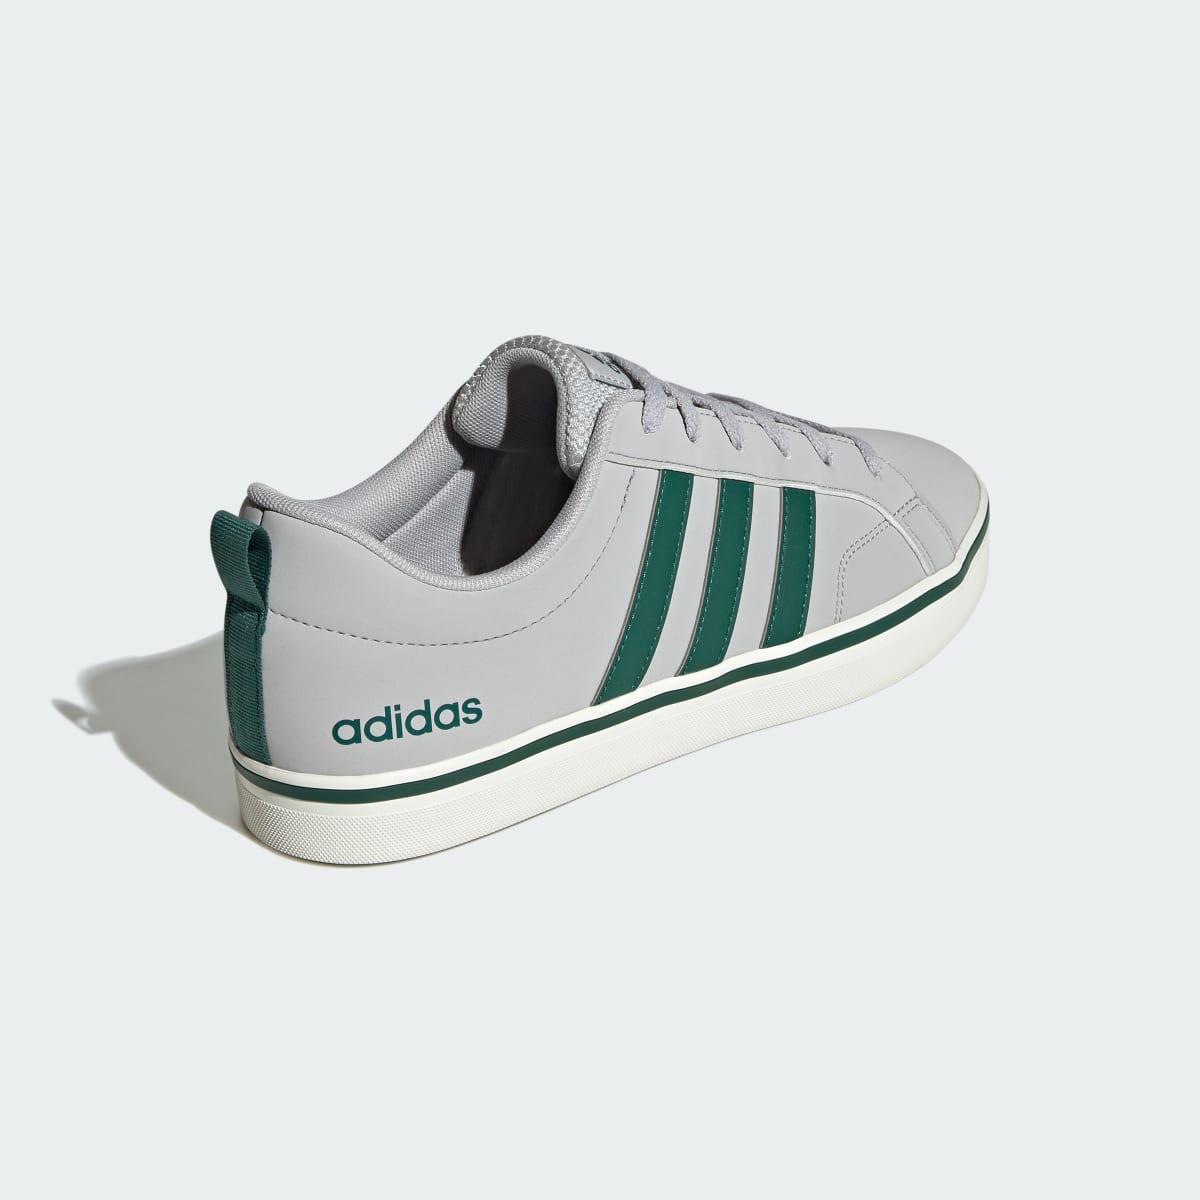 Adidas VS Pace 2.0 Shoes. 6